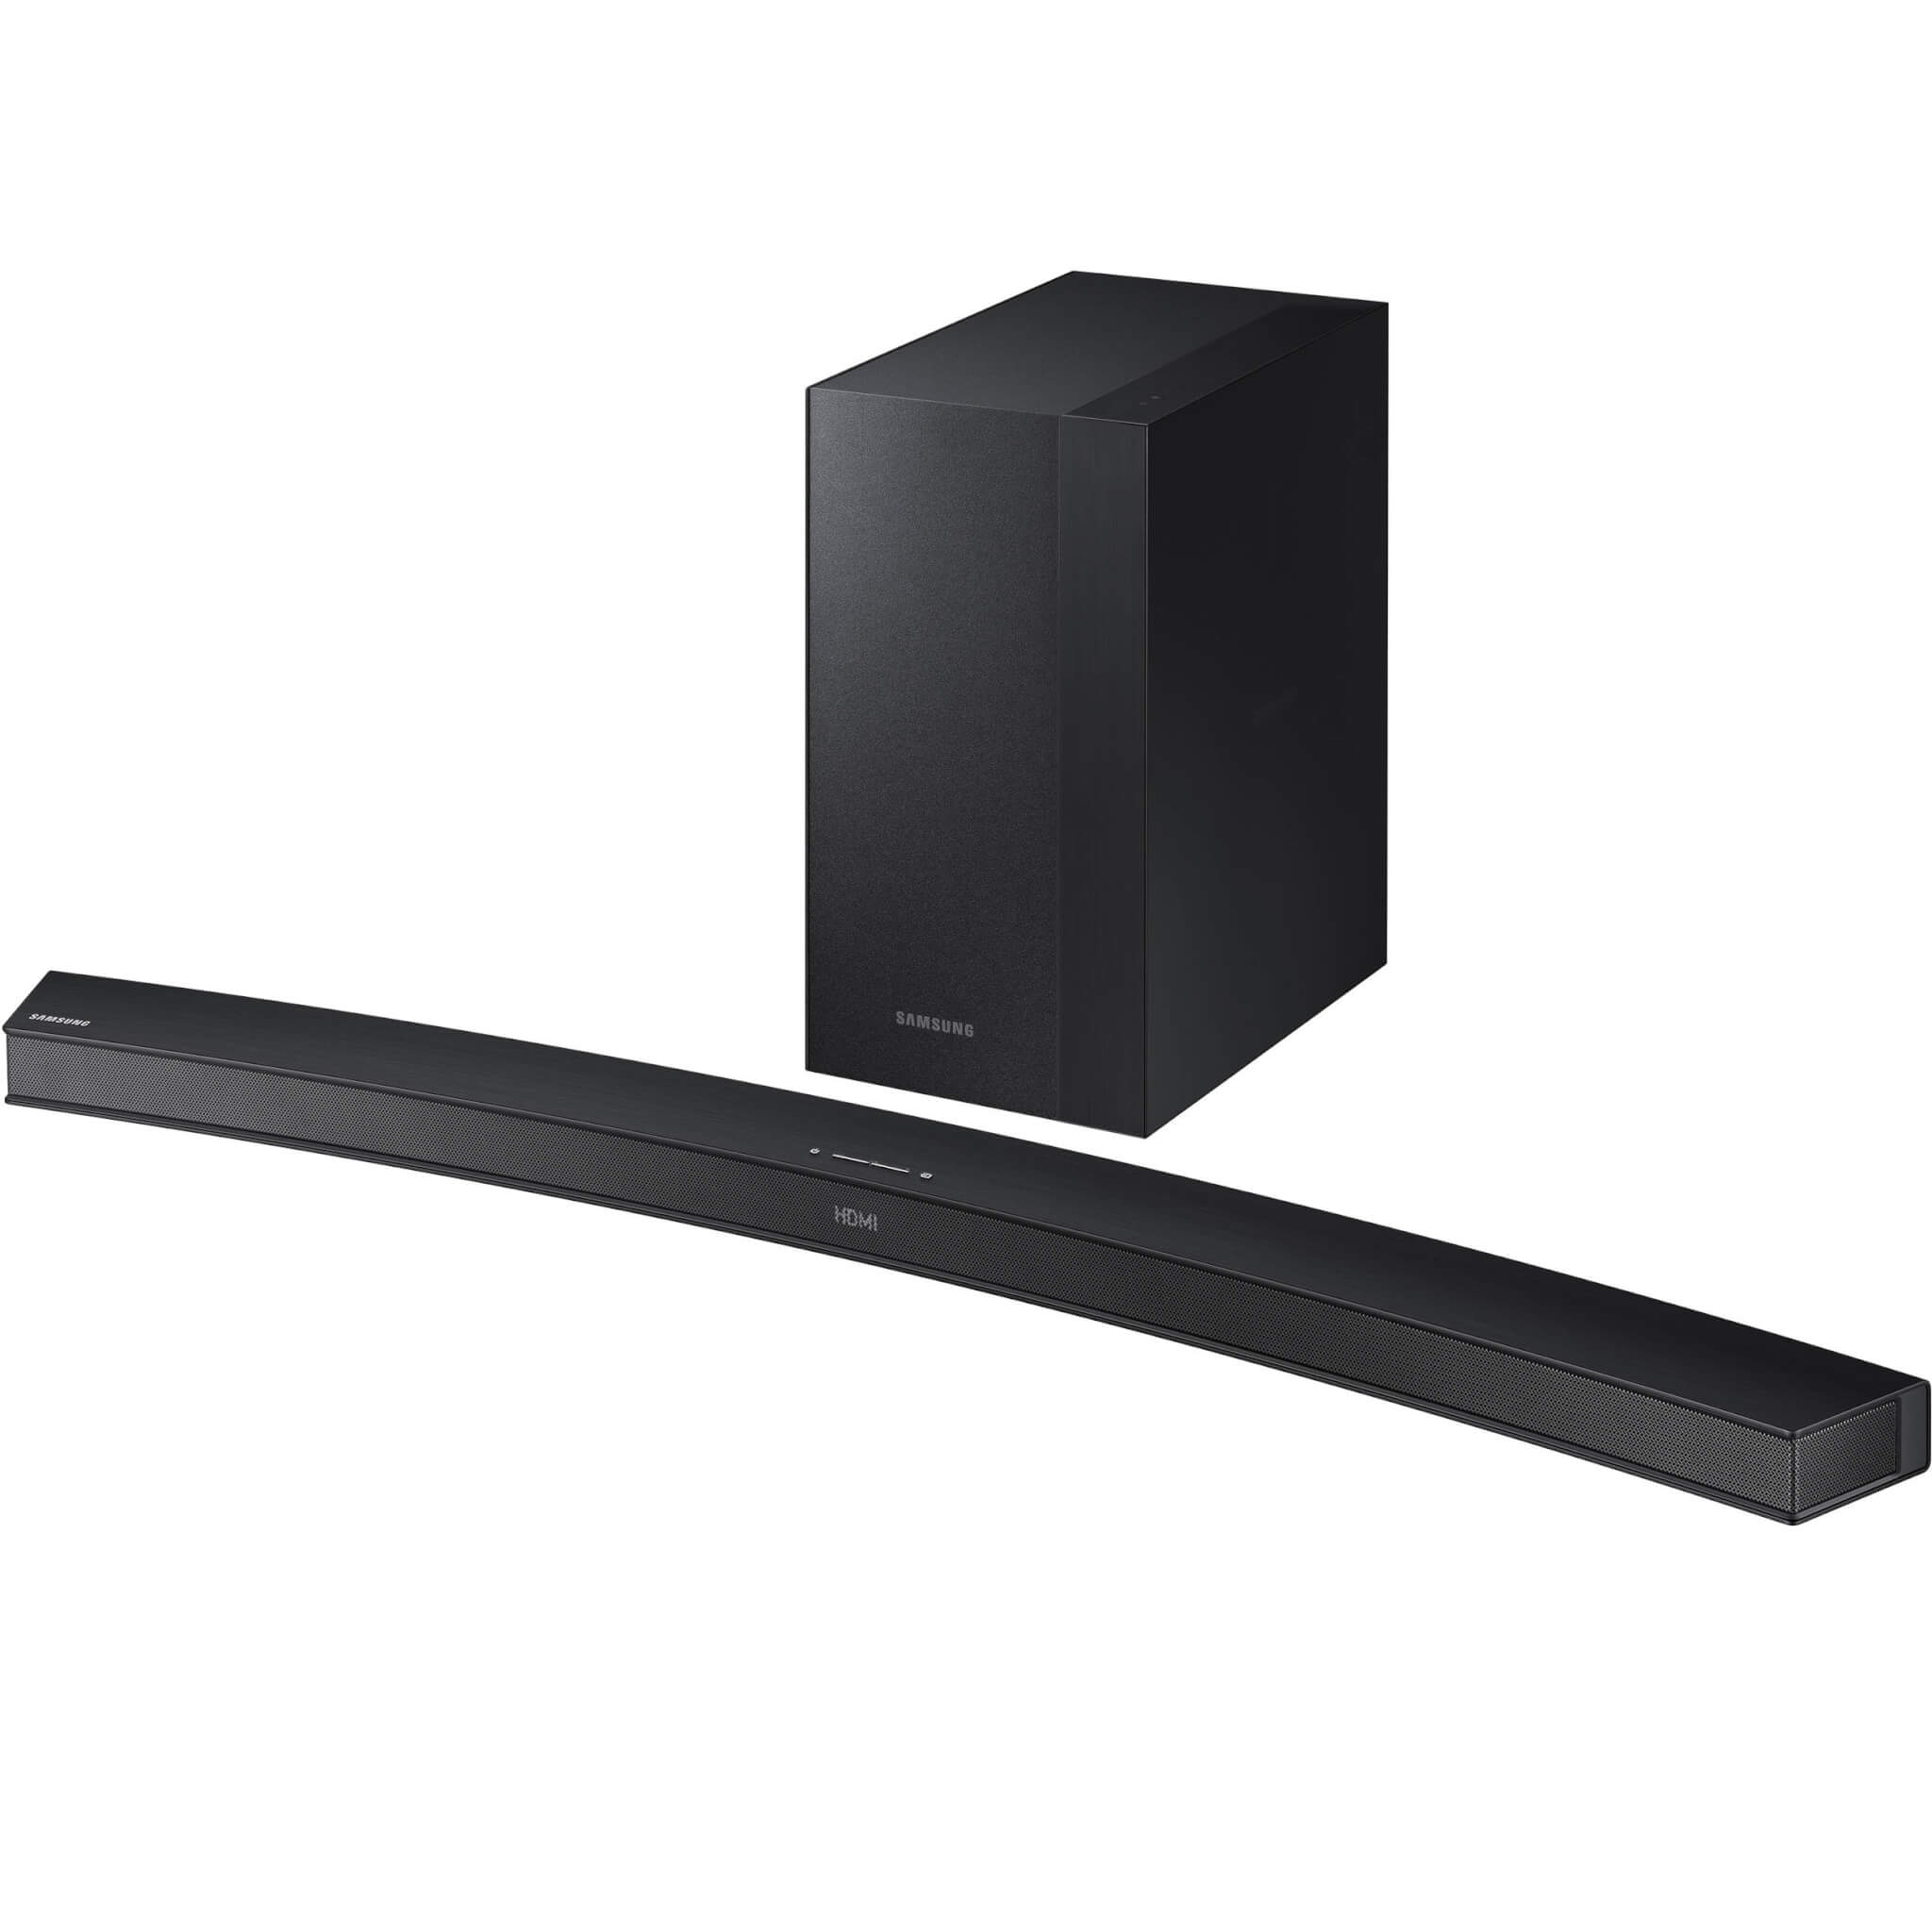 Best Samsung Curved Soundbar Complete Review BWS